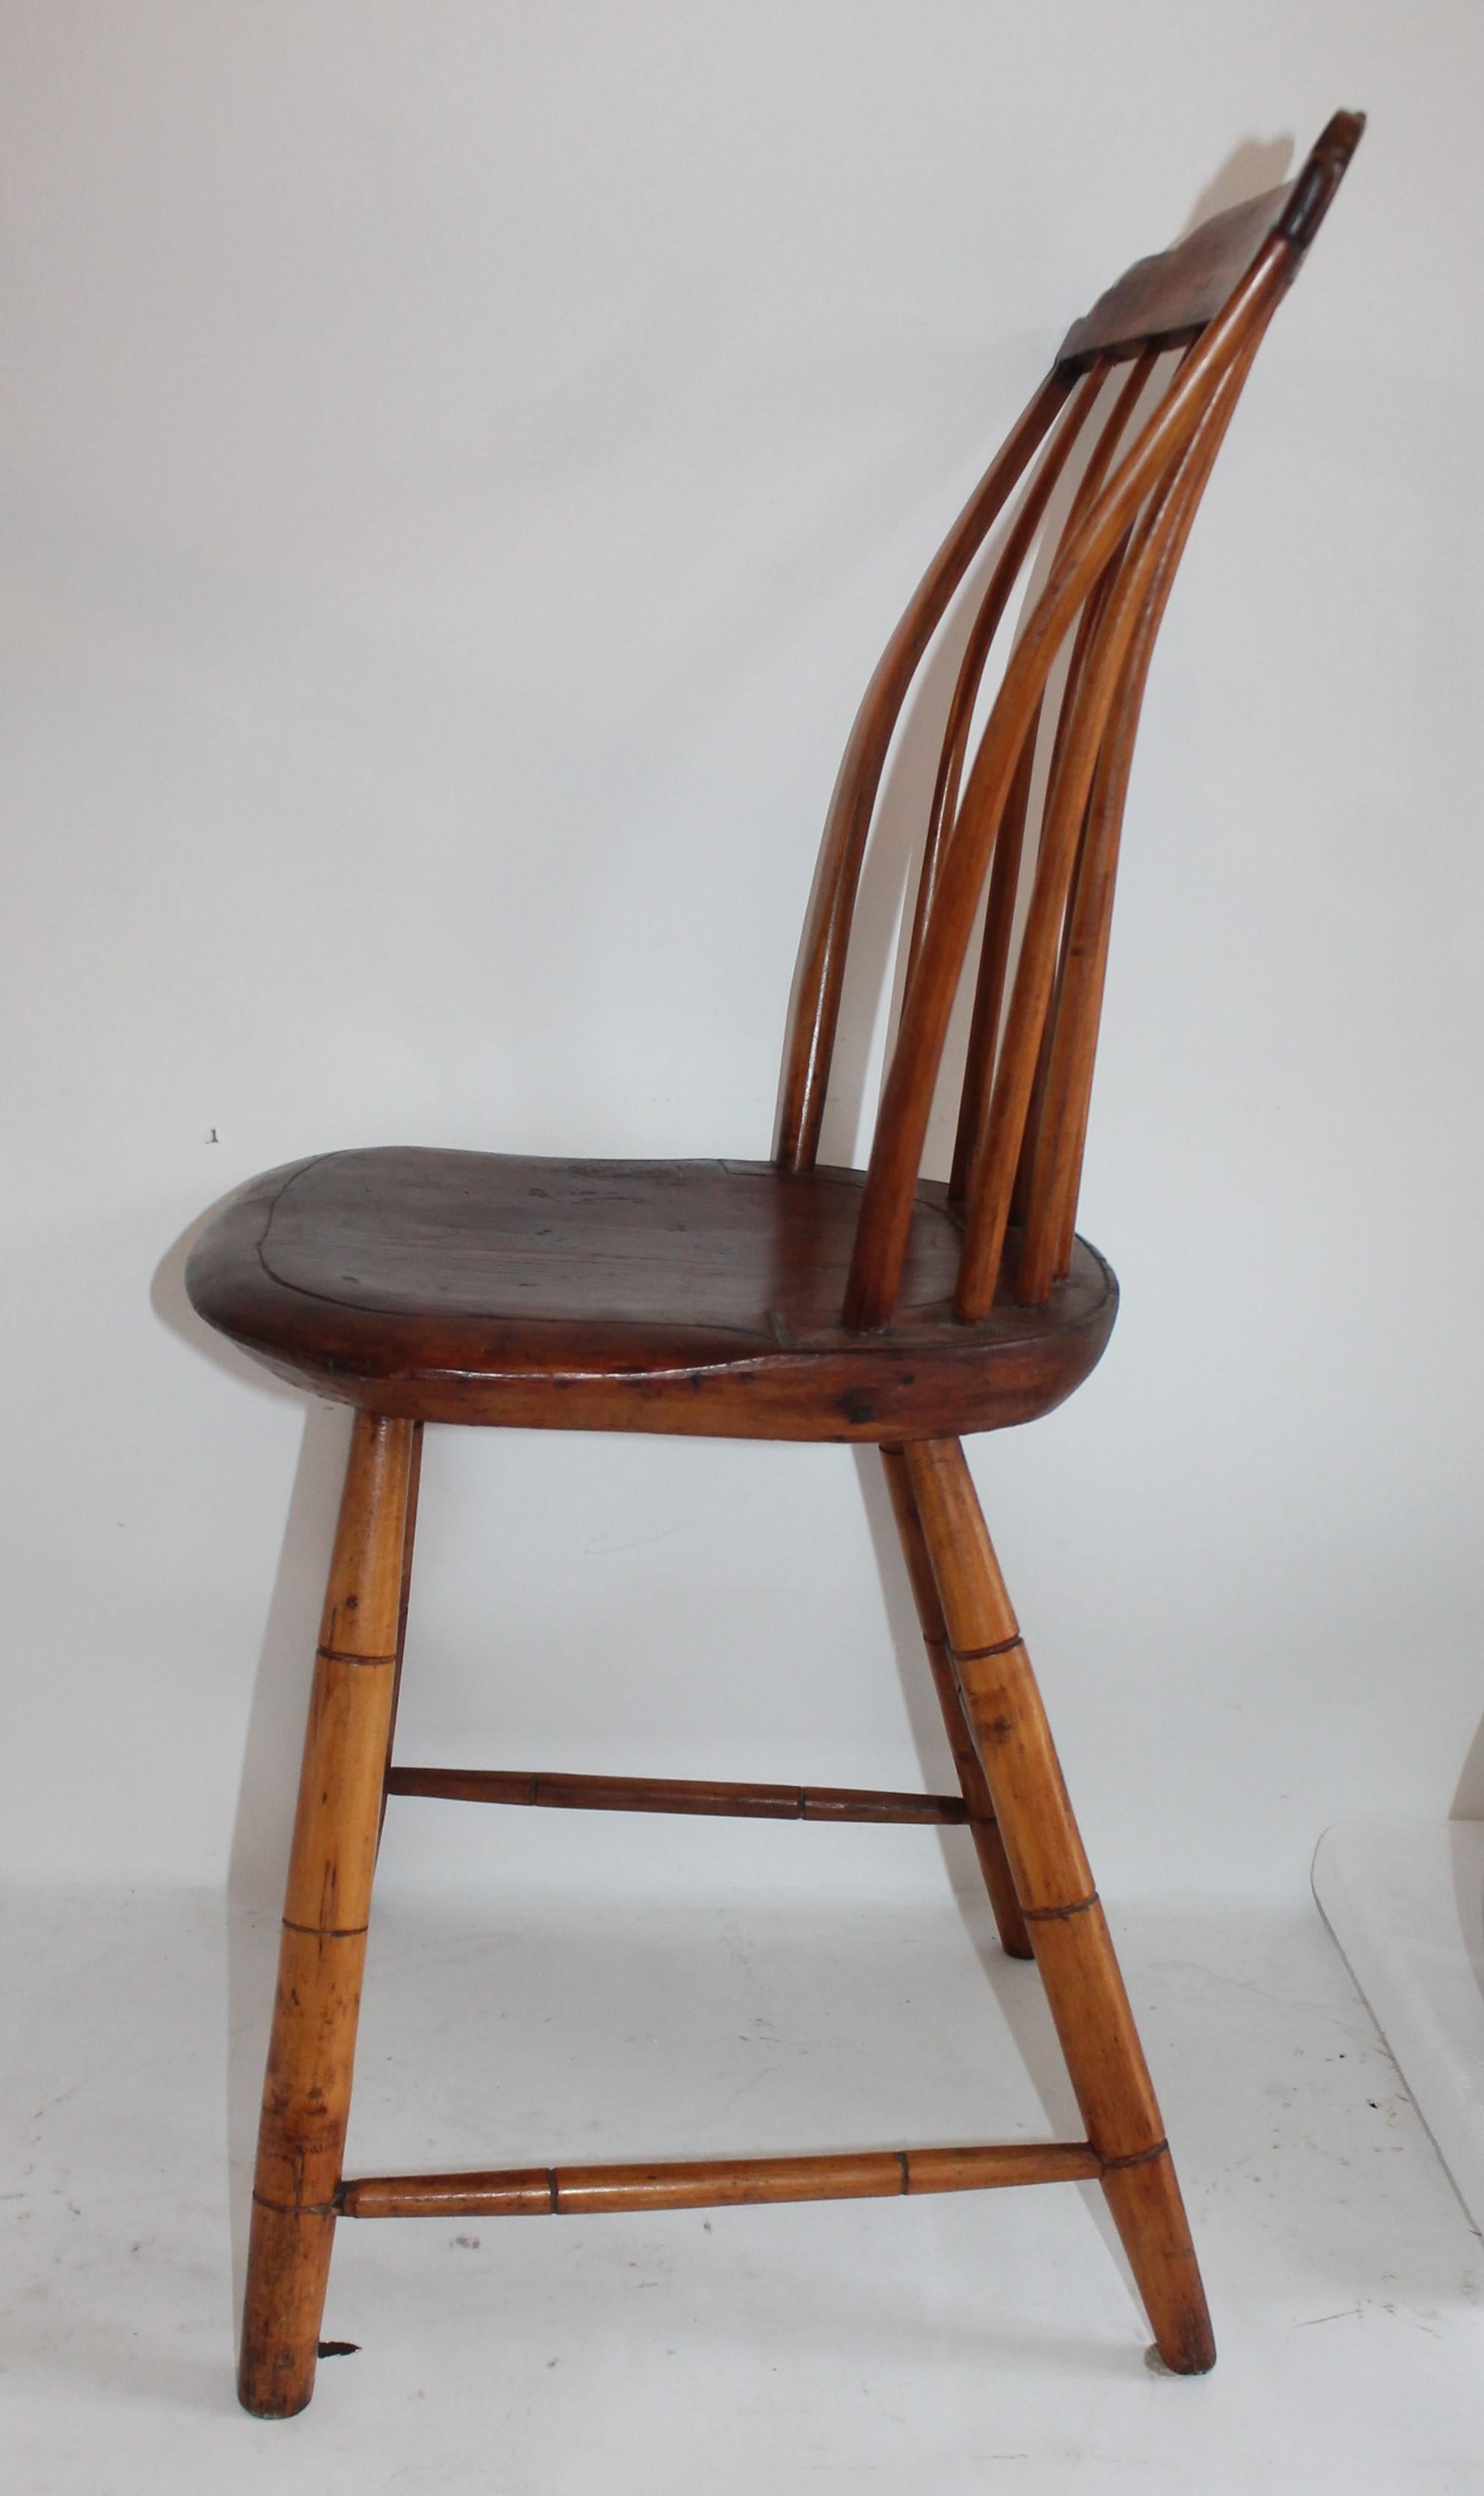 This fine original natural aged surface Windsor side chair is in fine condition with mellow wear. It is strong, sturdy condition. This was found in New England collection.